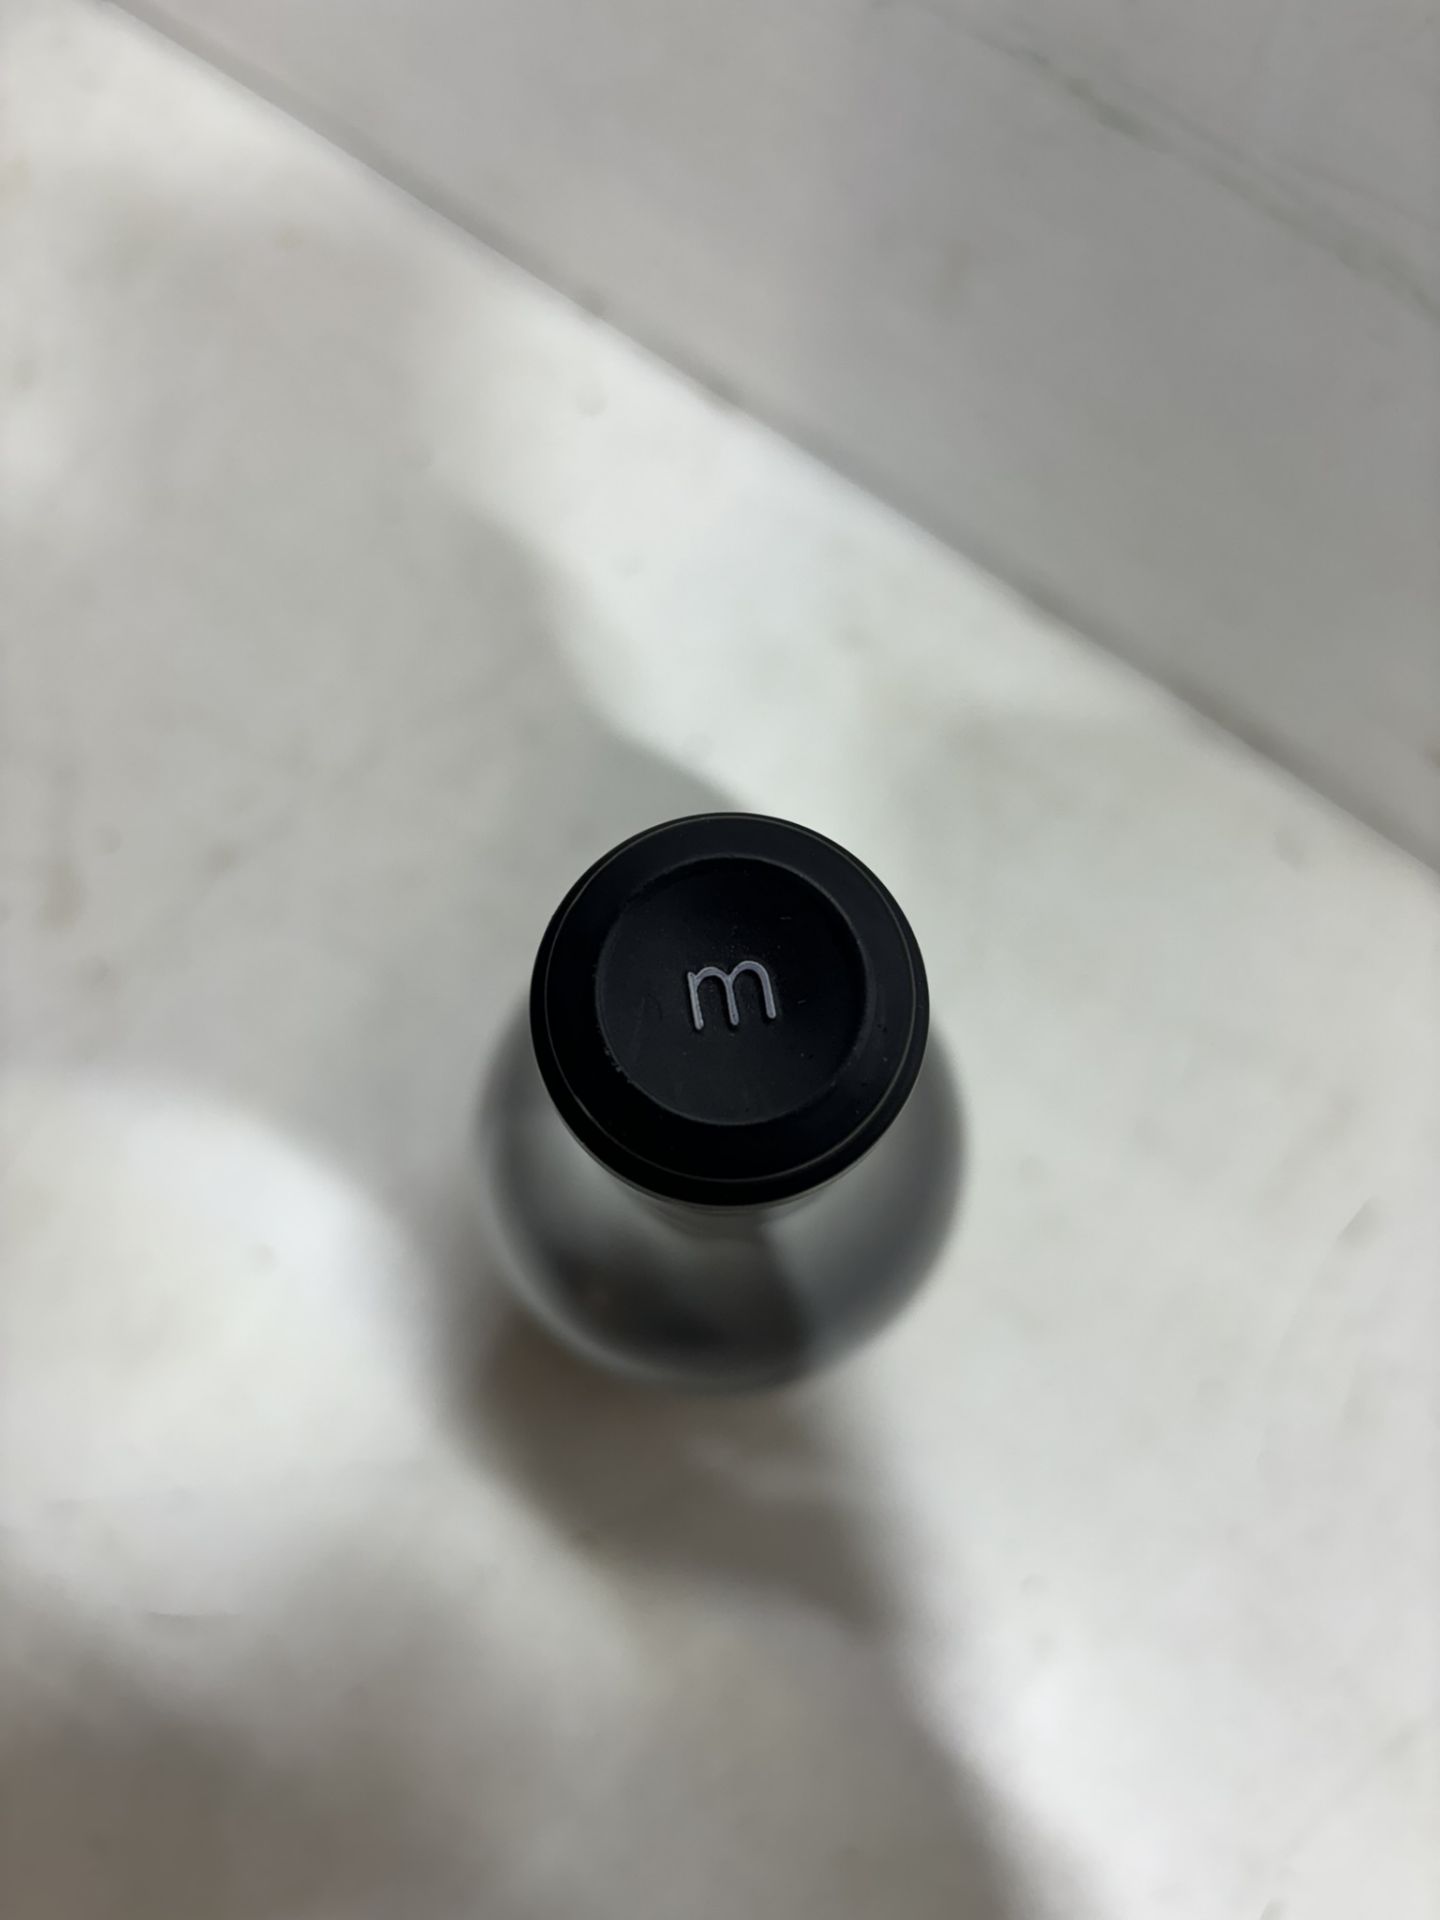 6 X Bottles Of Orin Swift Mannequin 2018 California Chardonnay 75Cl - Image 3 of 3